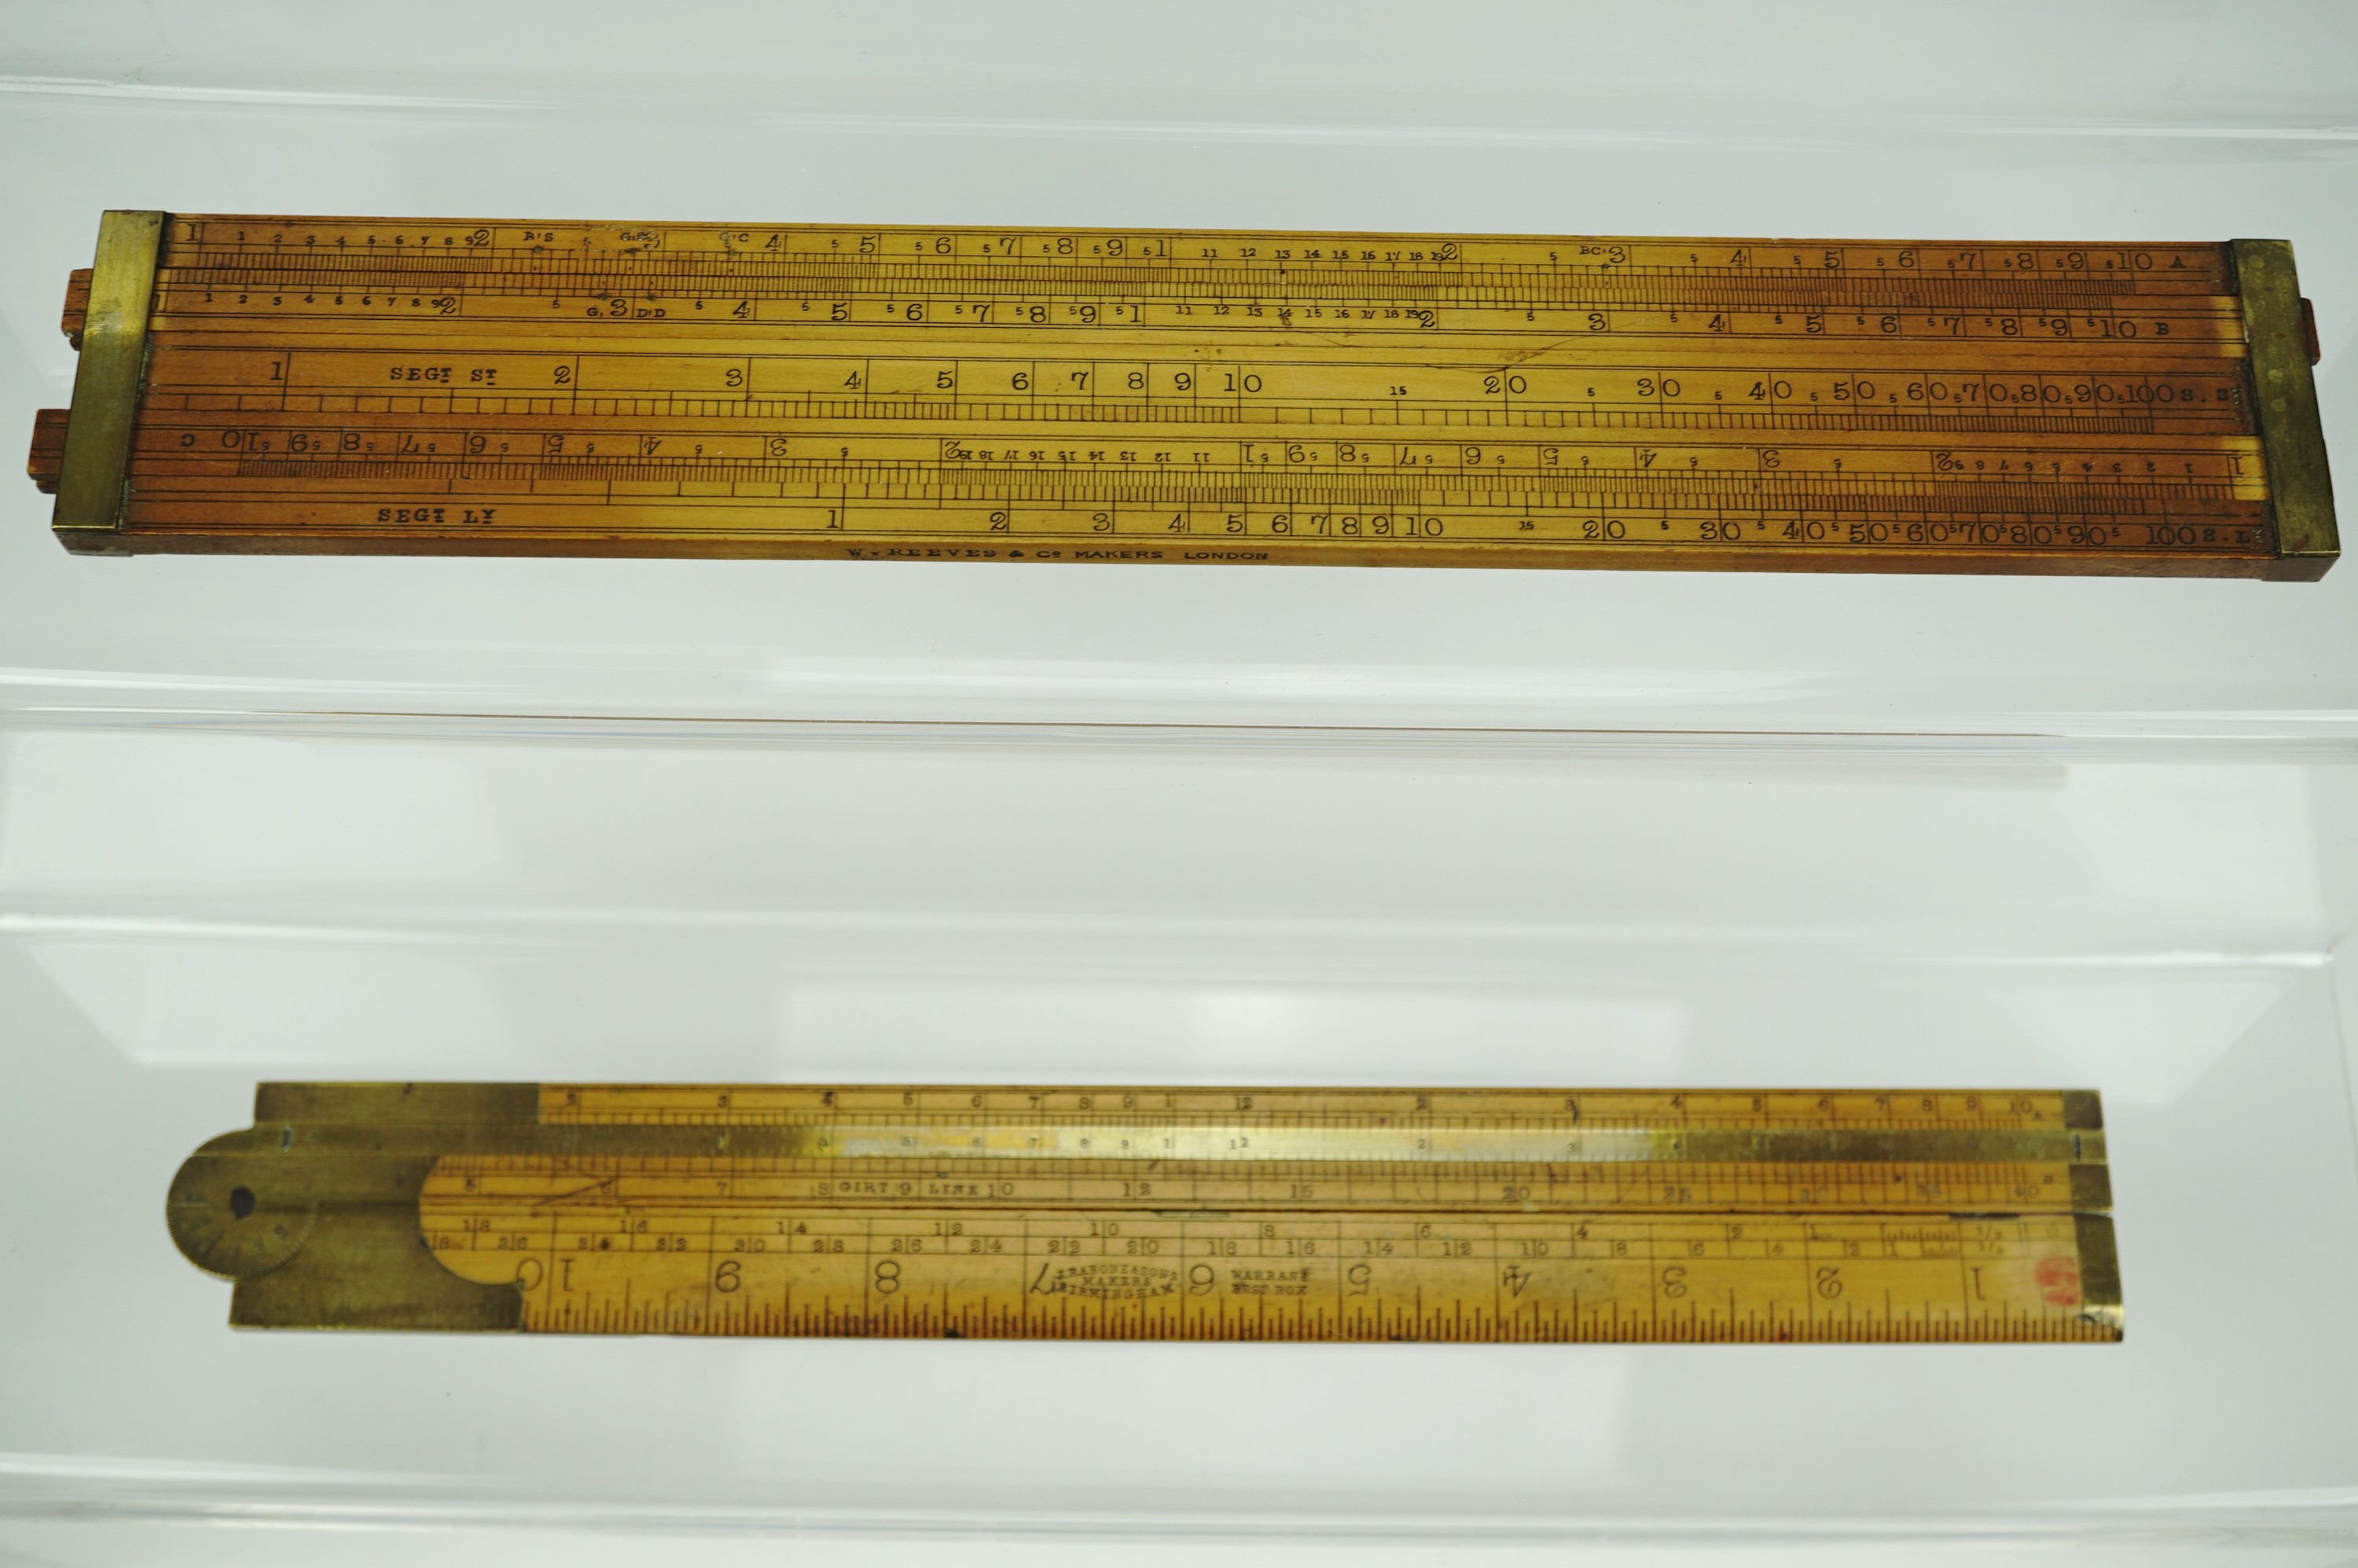 A Reeves Customs and Excise type brass-mounted box wood ruler / gauge, together with a Rabone timber